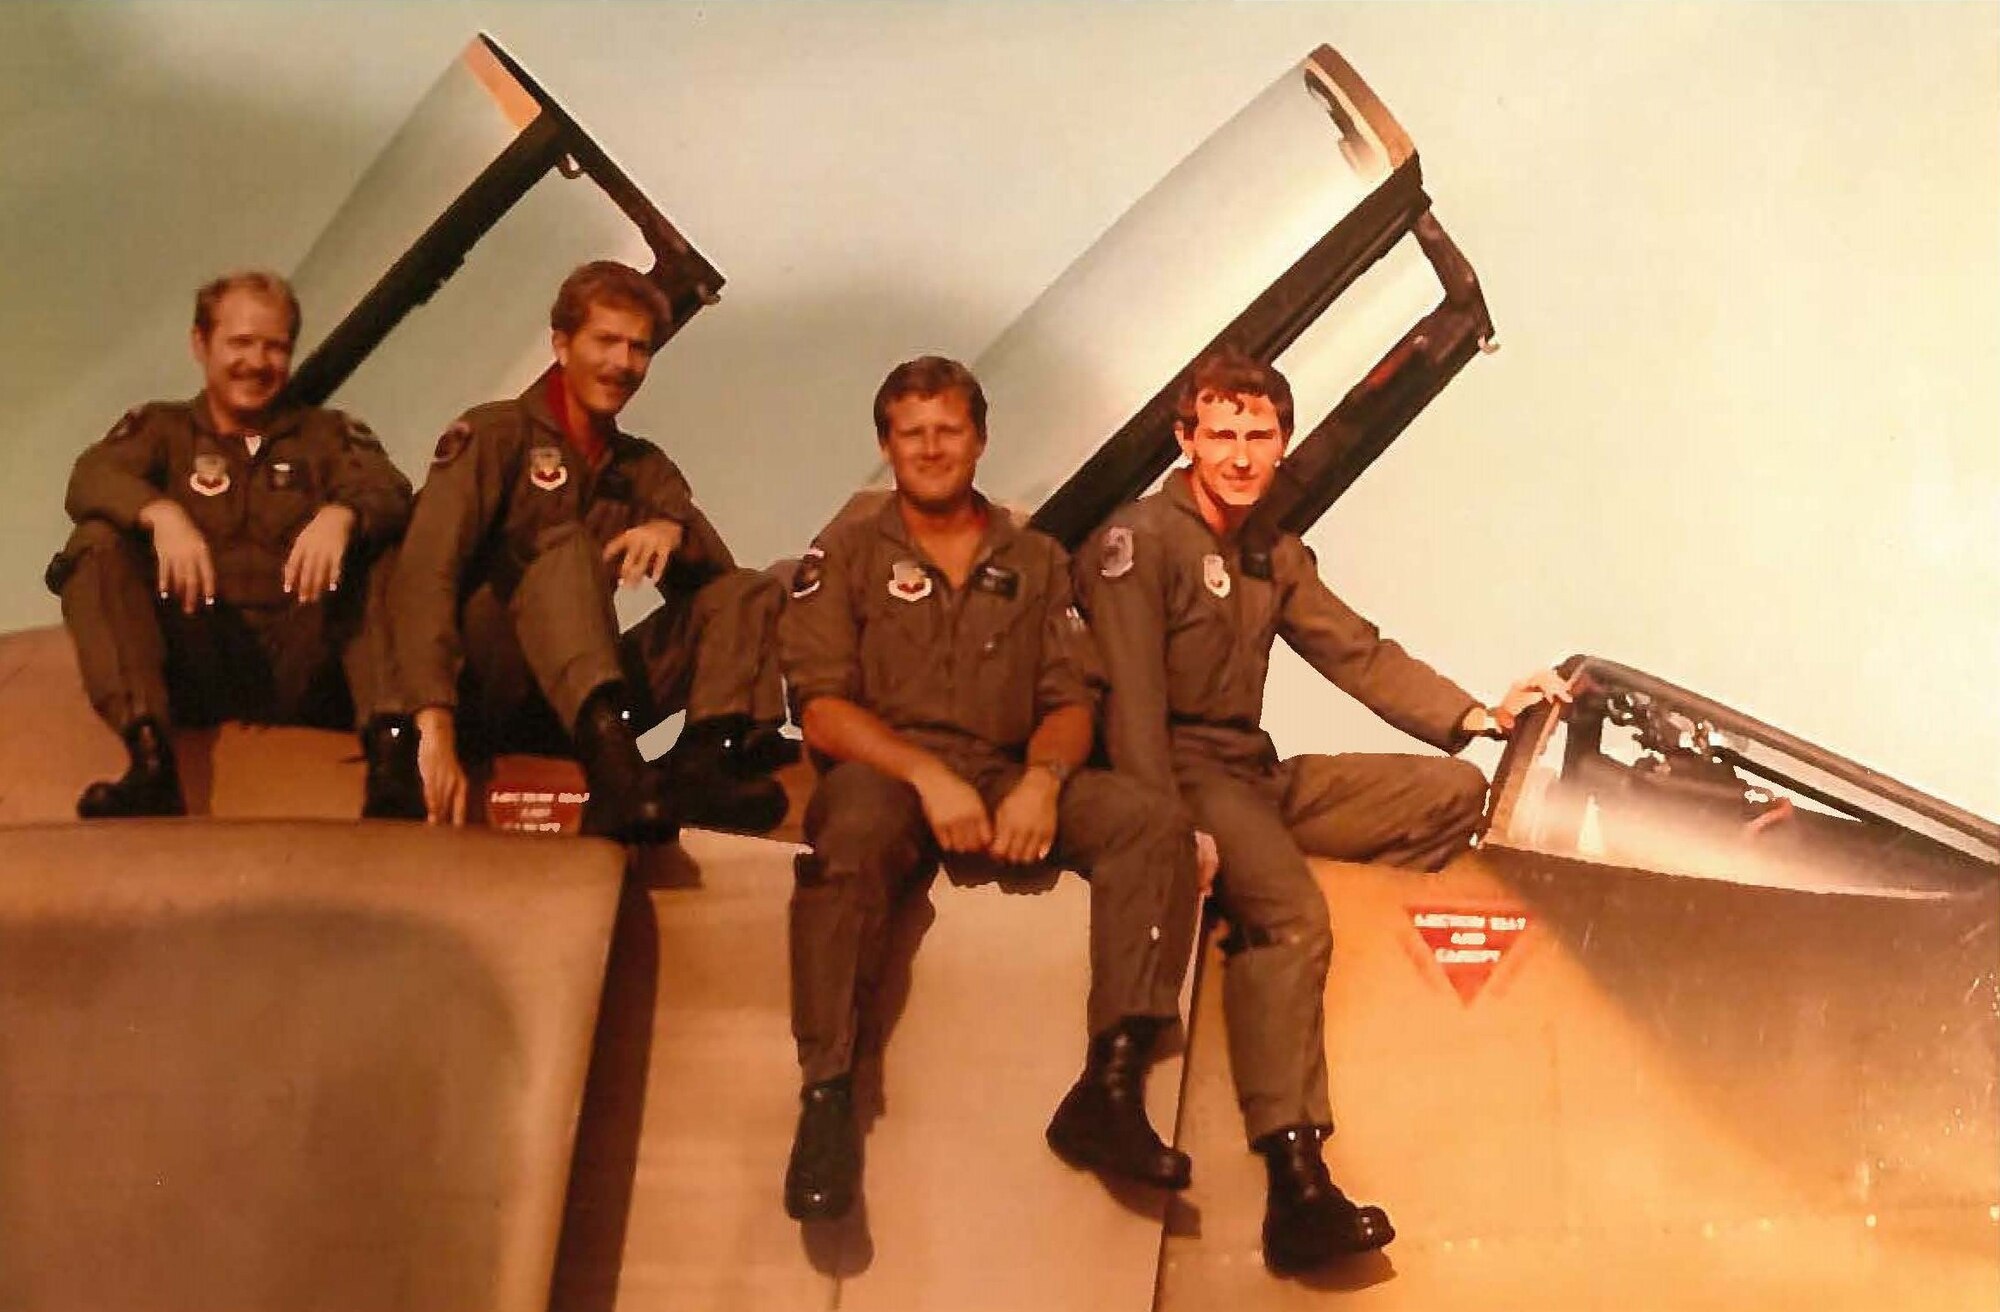 Staff Sgt. Jim Cagle, second from left, poses for a photo on a  F-4C Phantom at an undisclosed location. 26 years after separating from service at the rank of captain. Cagle rejoined as enlisted member with the 403rd Wing at Keesler Air Force Base, Miss. (U.S. Air Force courtesy photo)